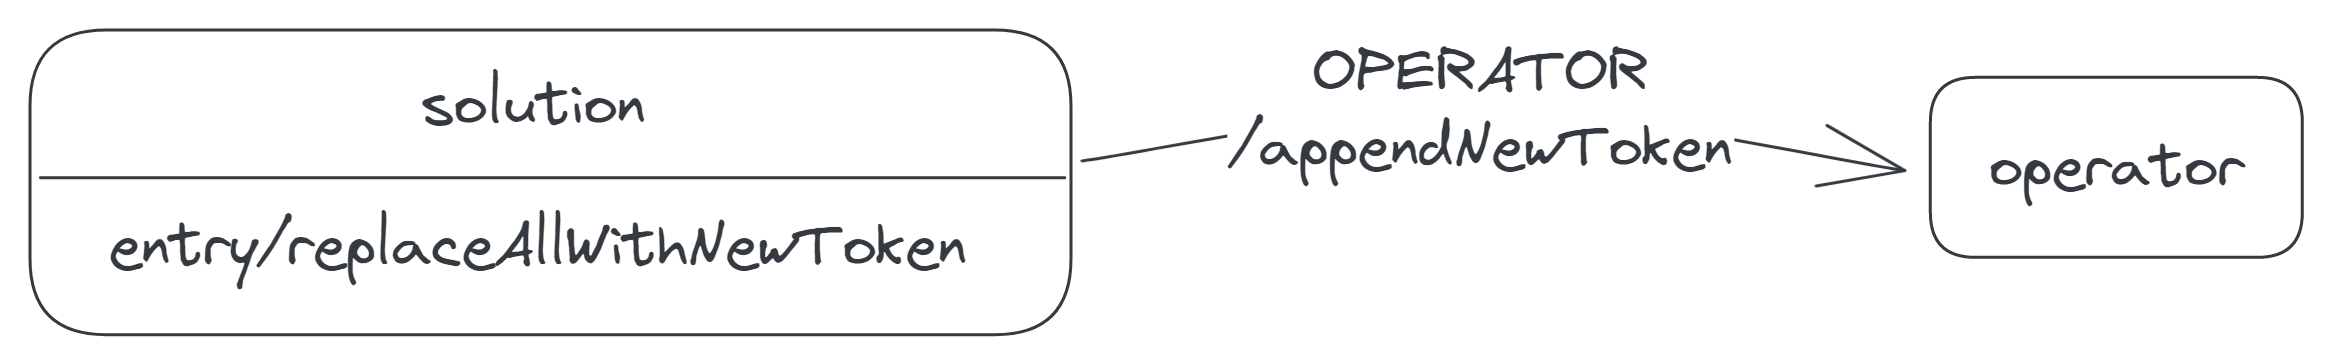 A transition labelled 'OPERATOR/appendNewToken', from the solution to the operator state.